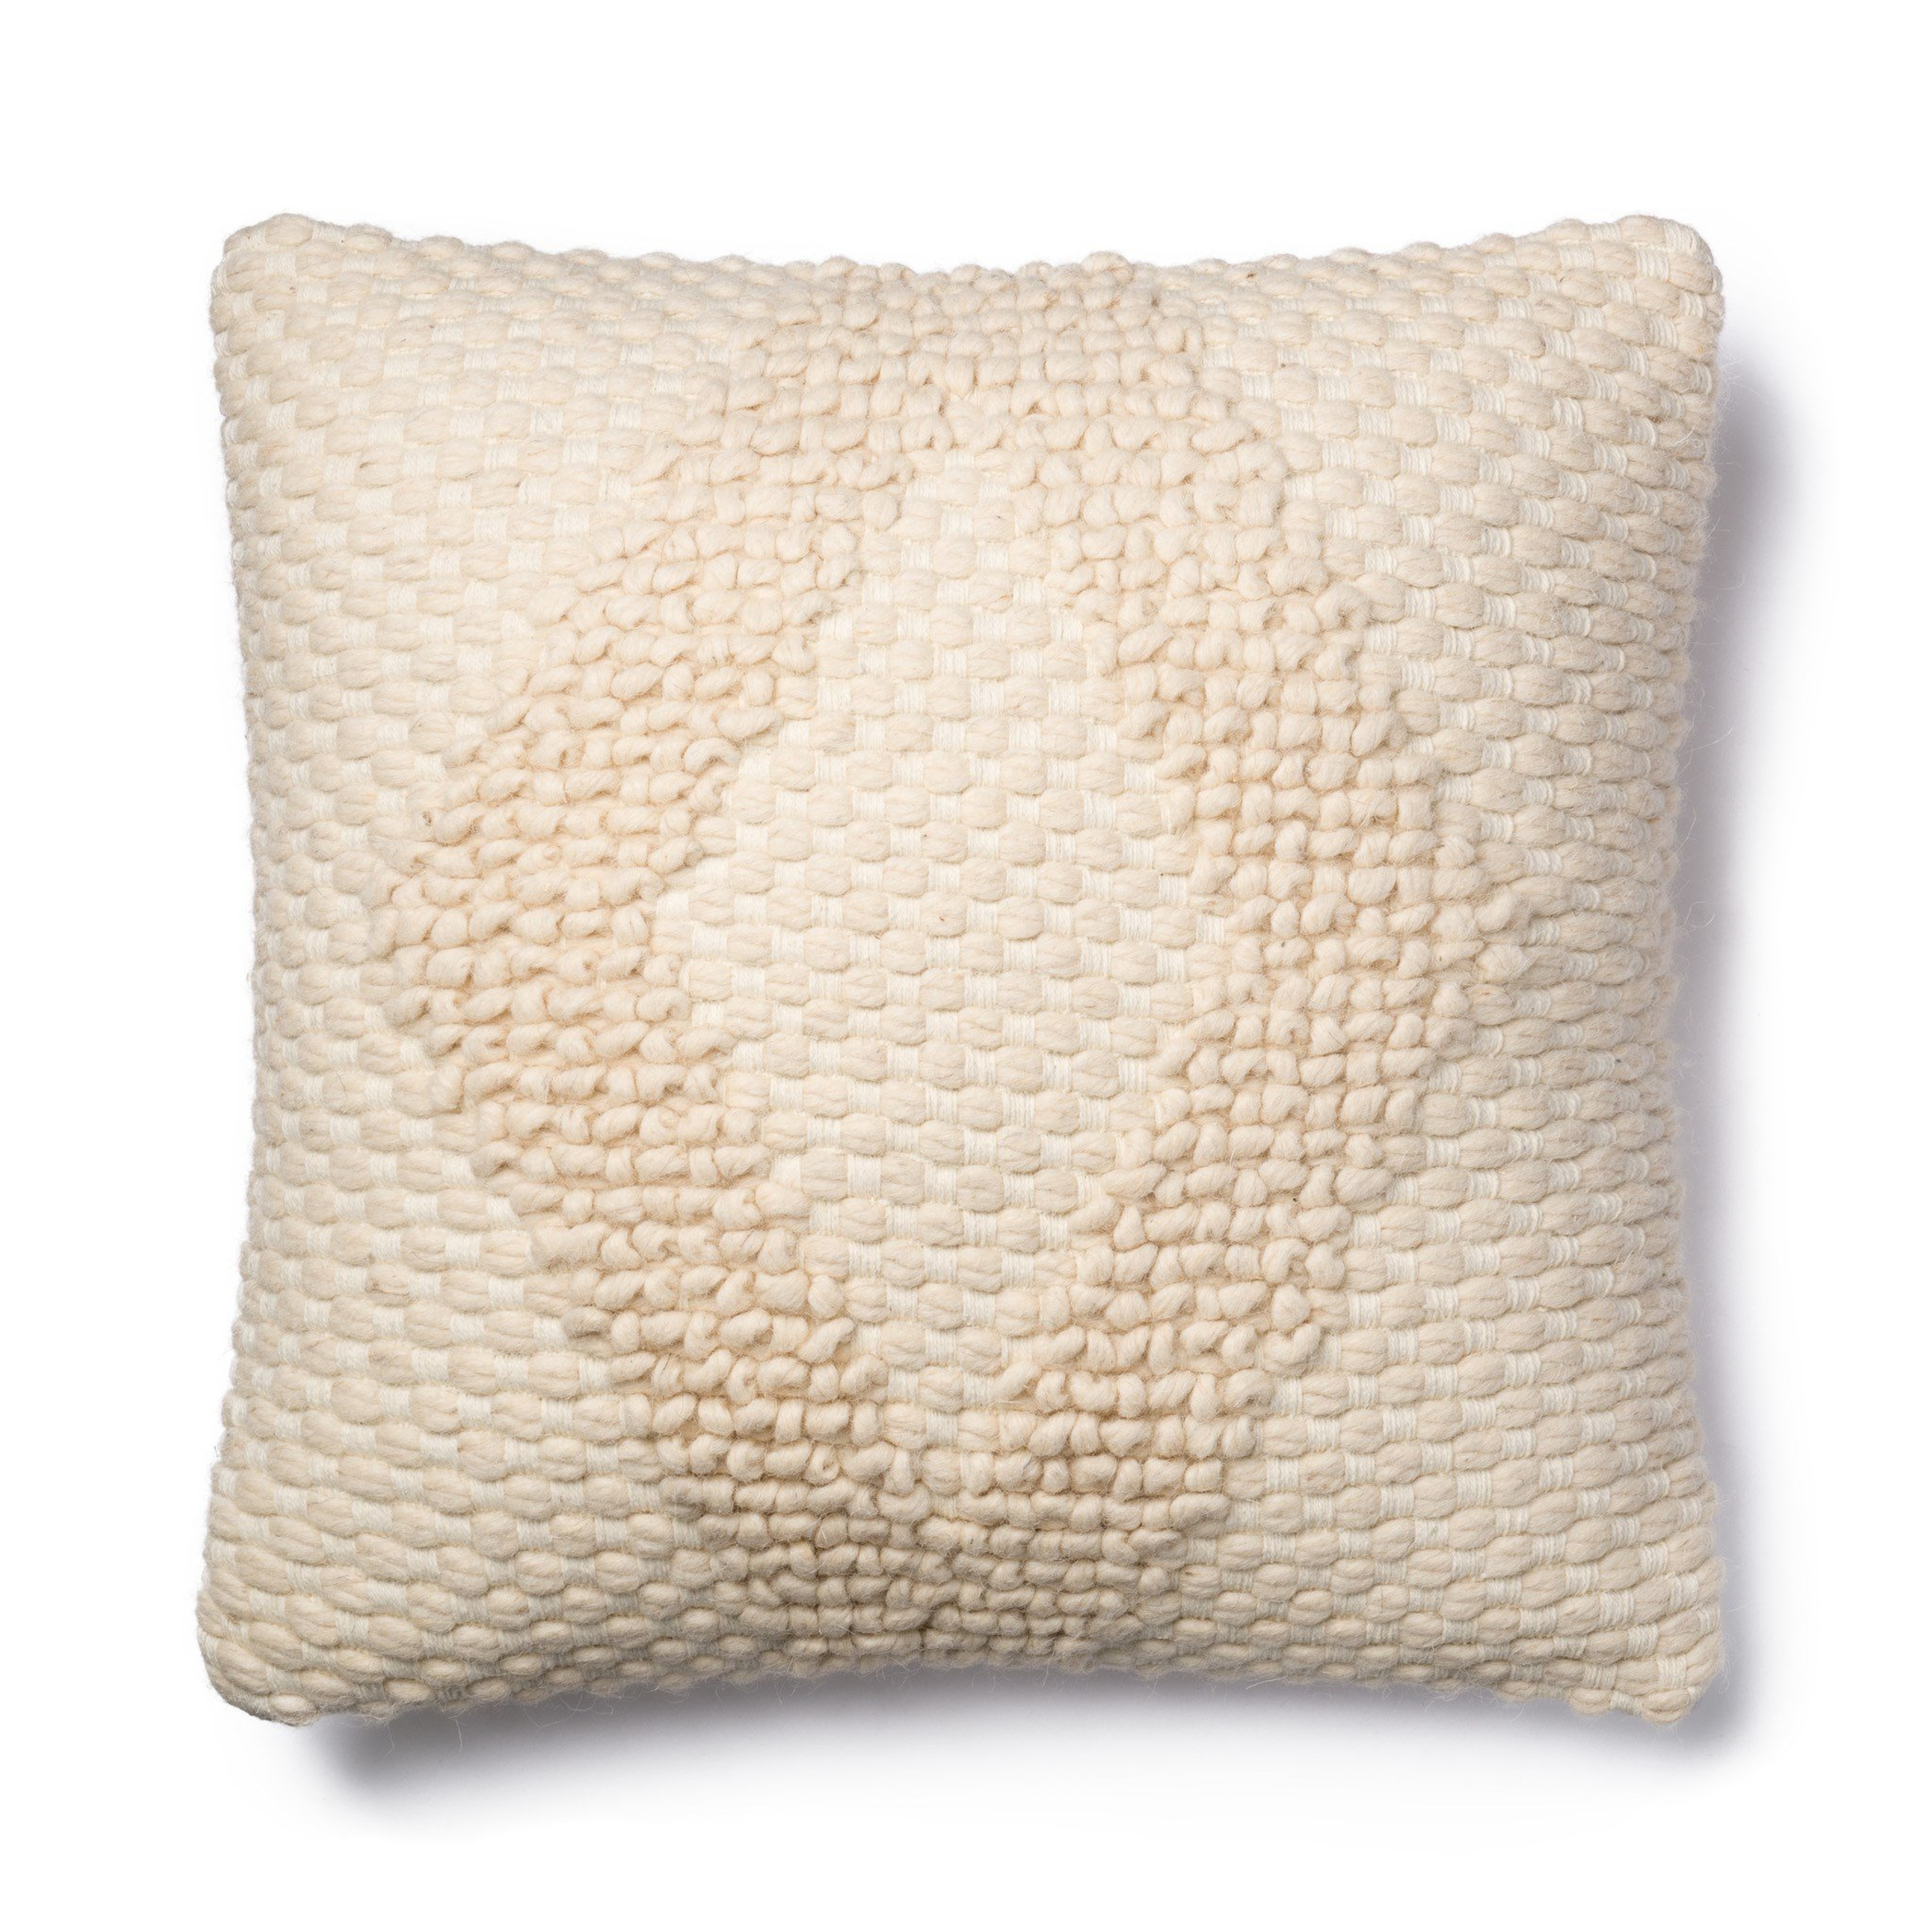 PILLOWS - IVORY 22x22 cover - Loma Threads